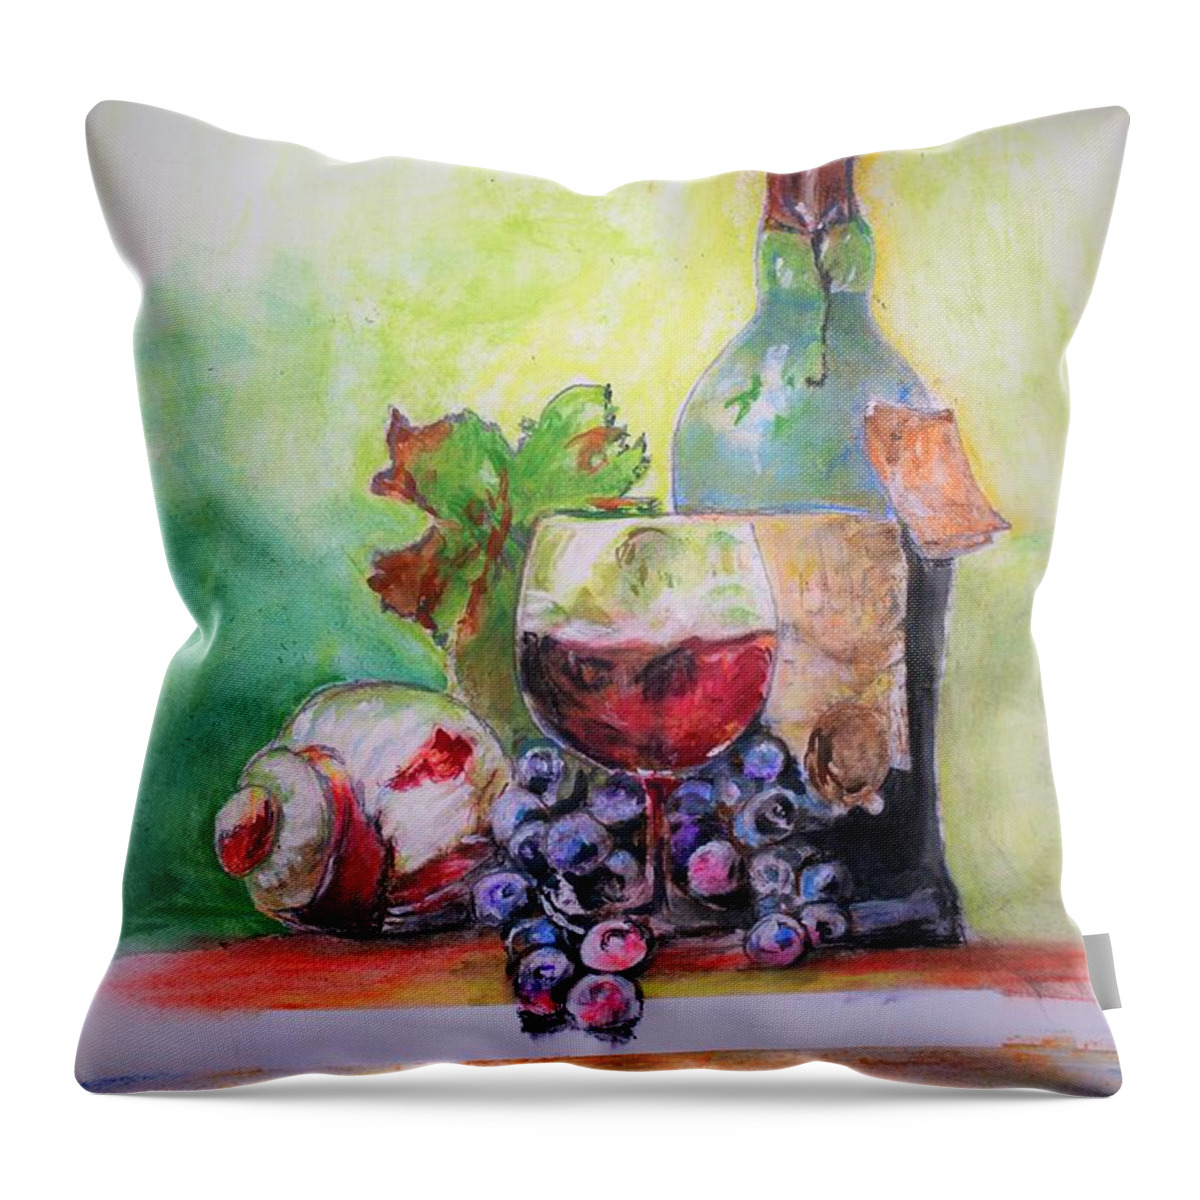 Still Life Throw Pillow featuring the painting Party arrangement by Khalid Saeed